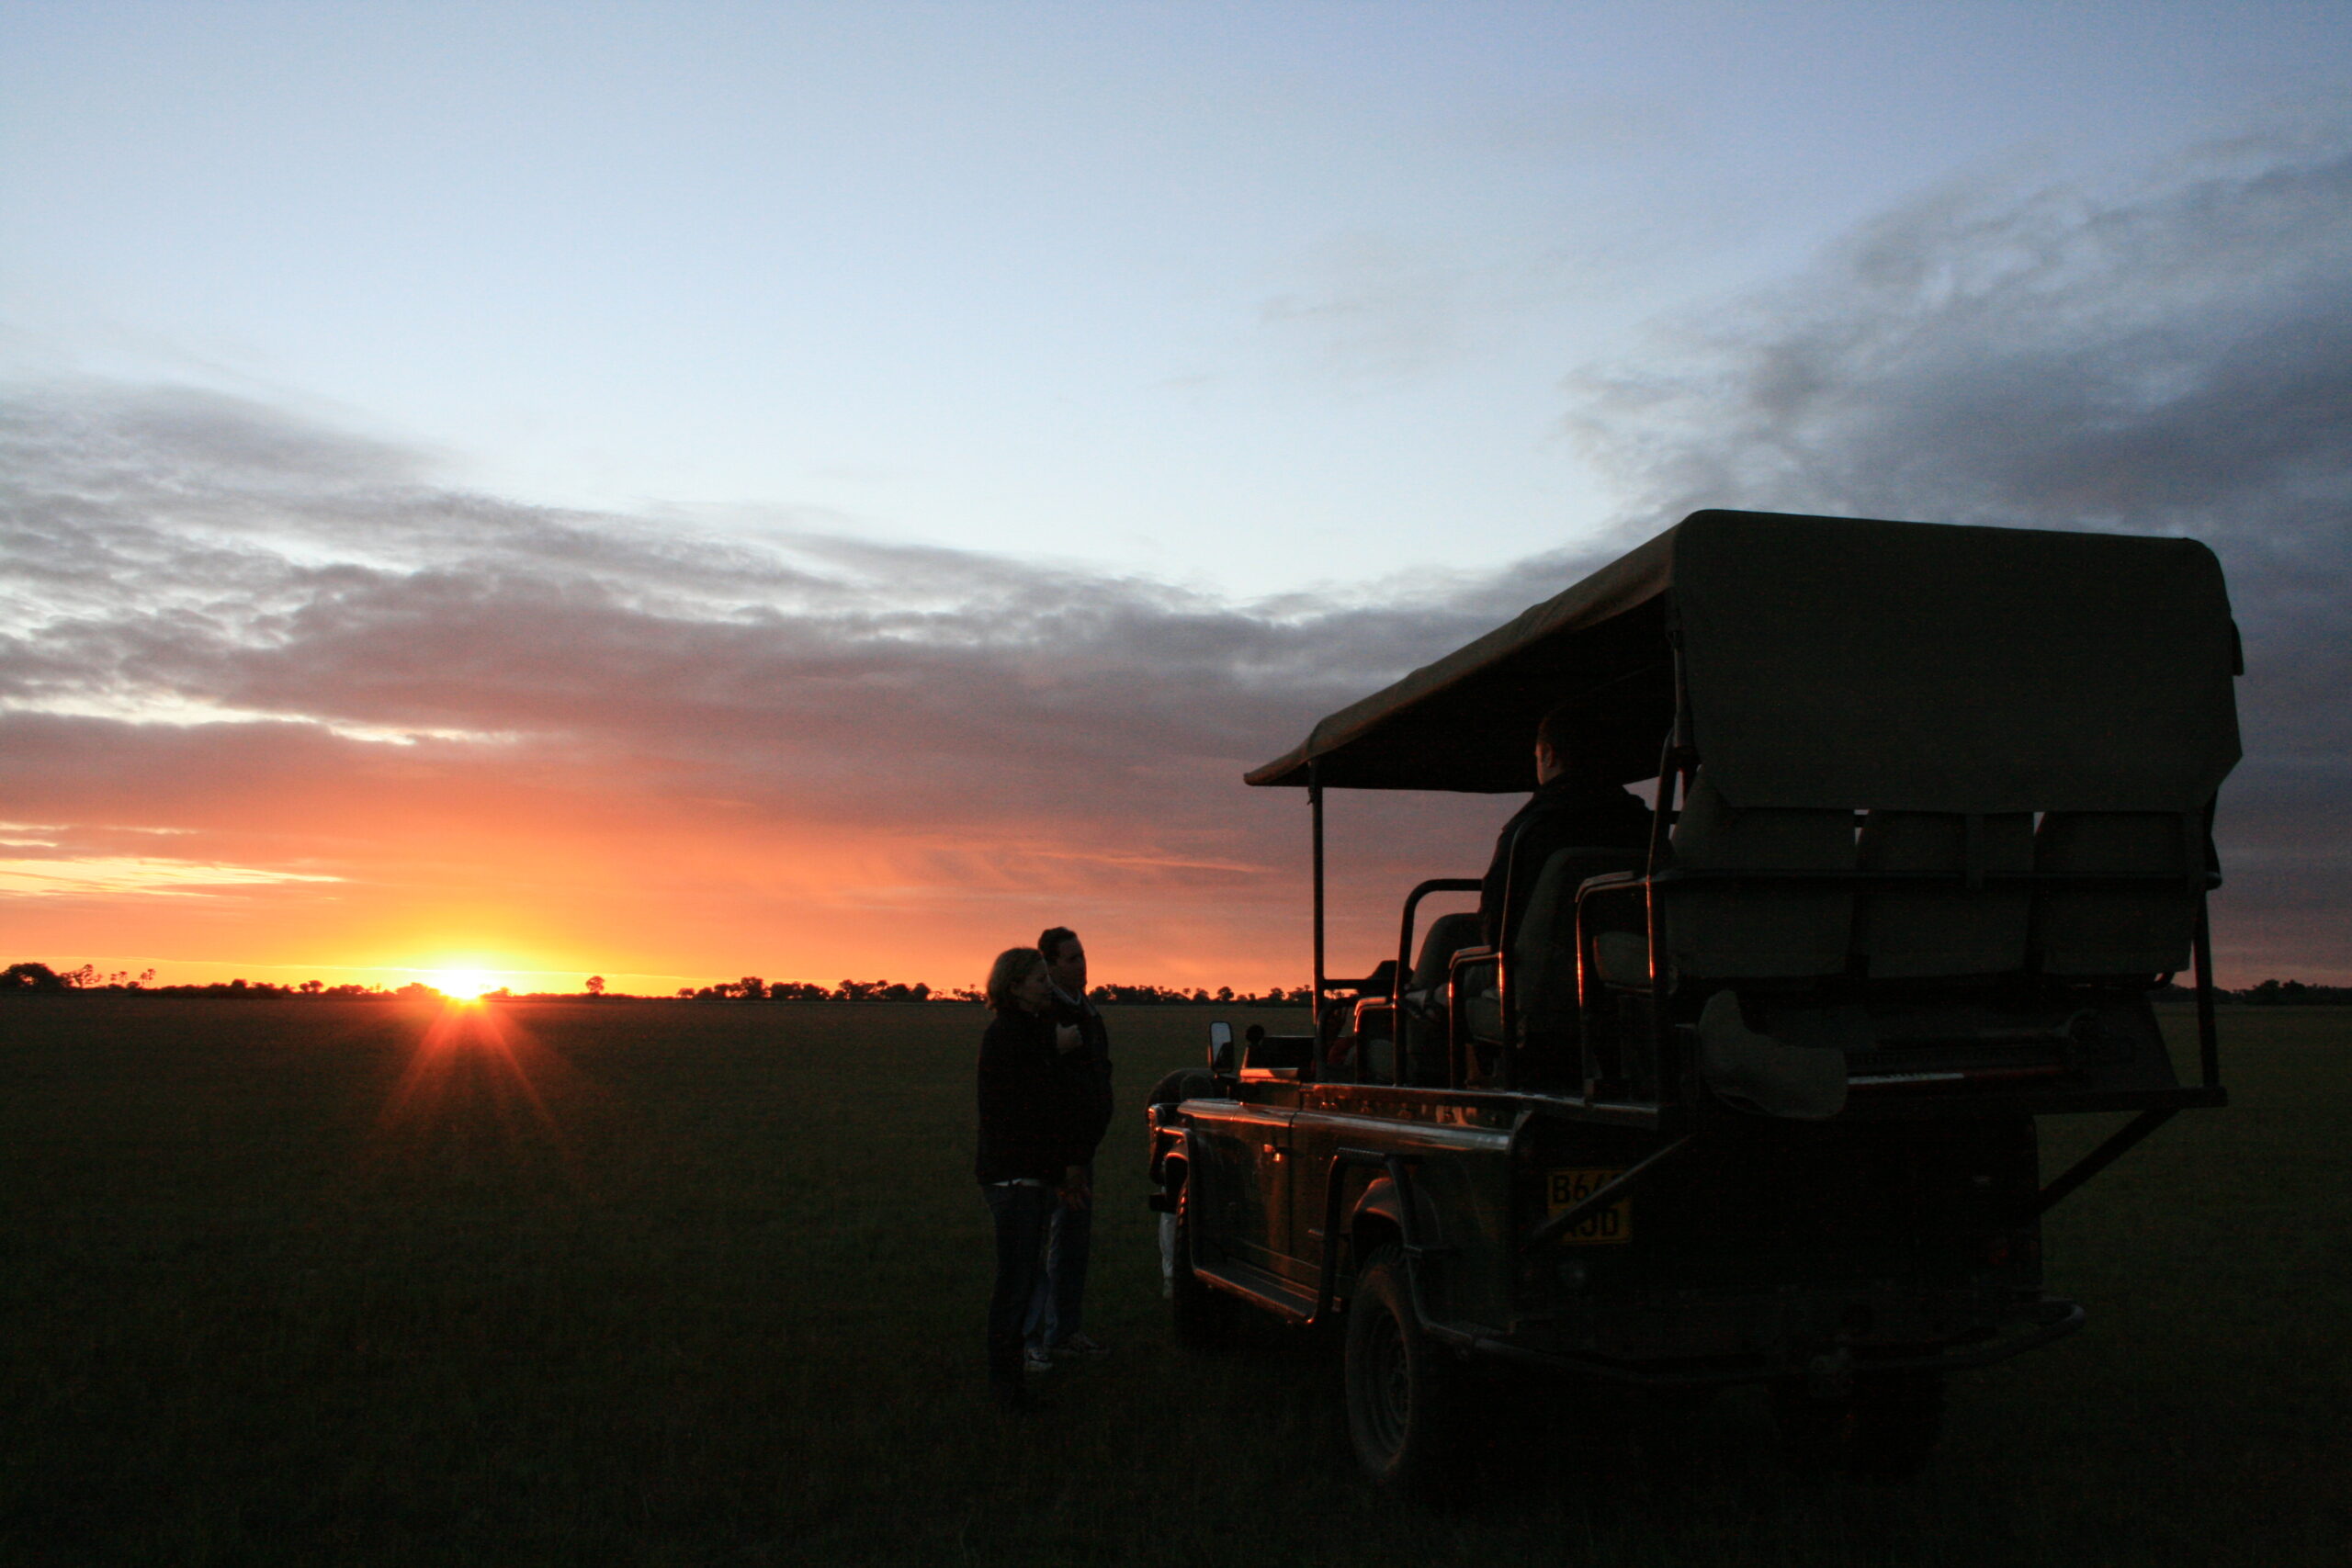 The sun sets over our Land Rover on our final day in Botswana.